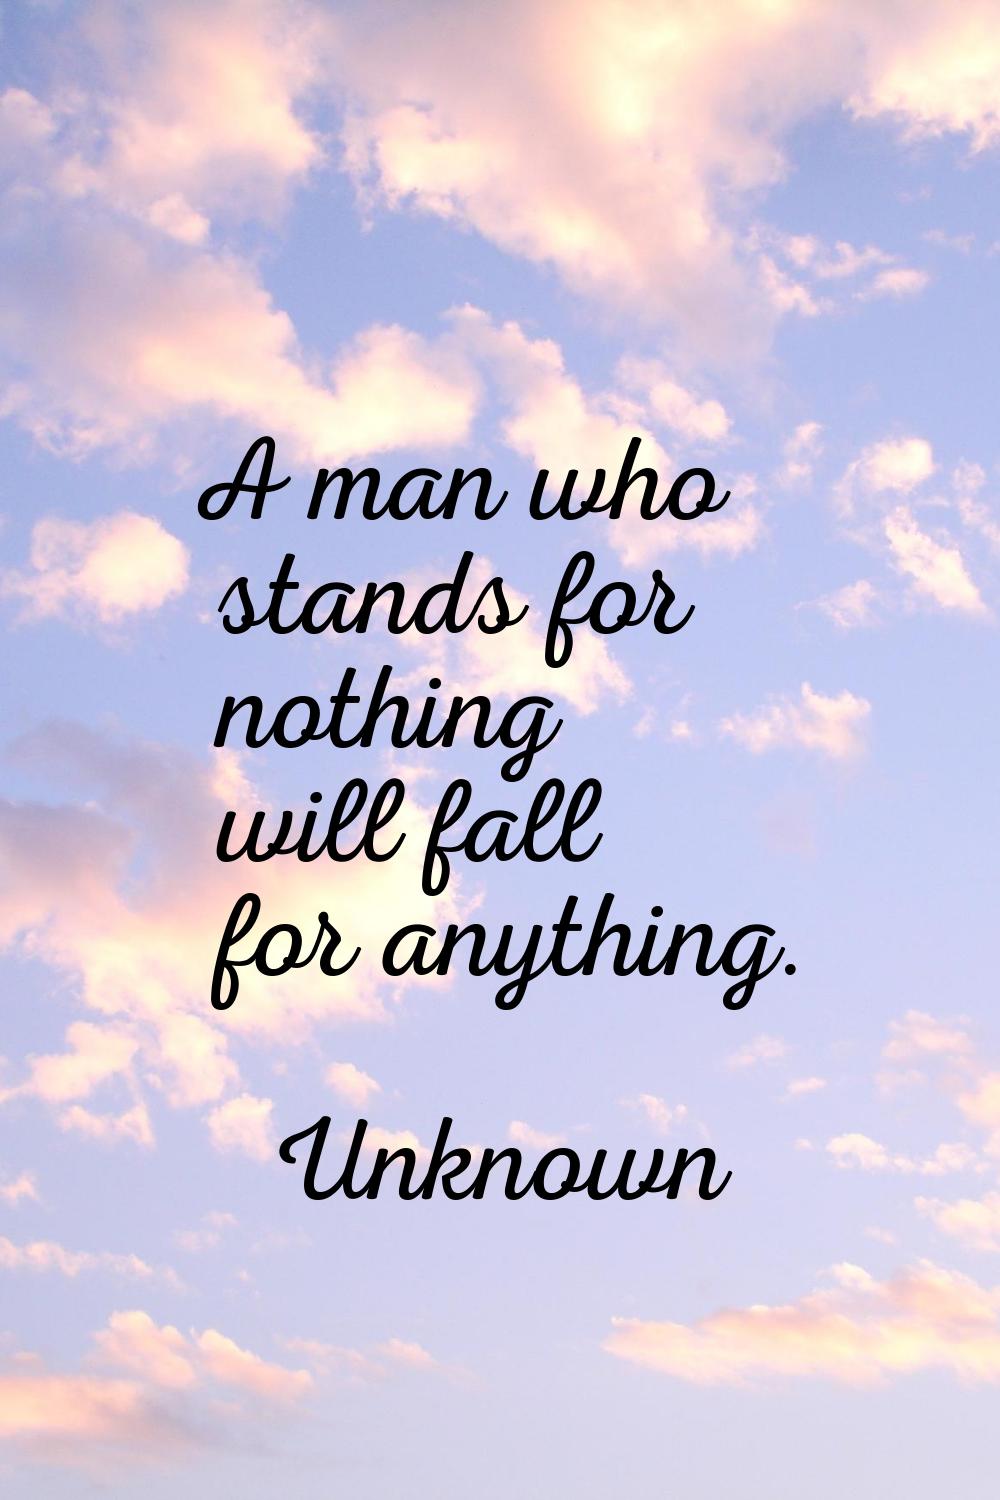 A man who stands for nothing will fall for anything.